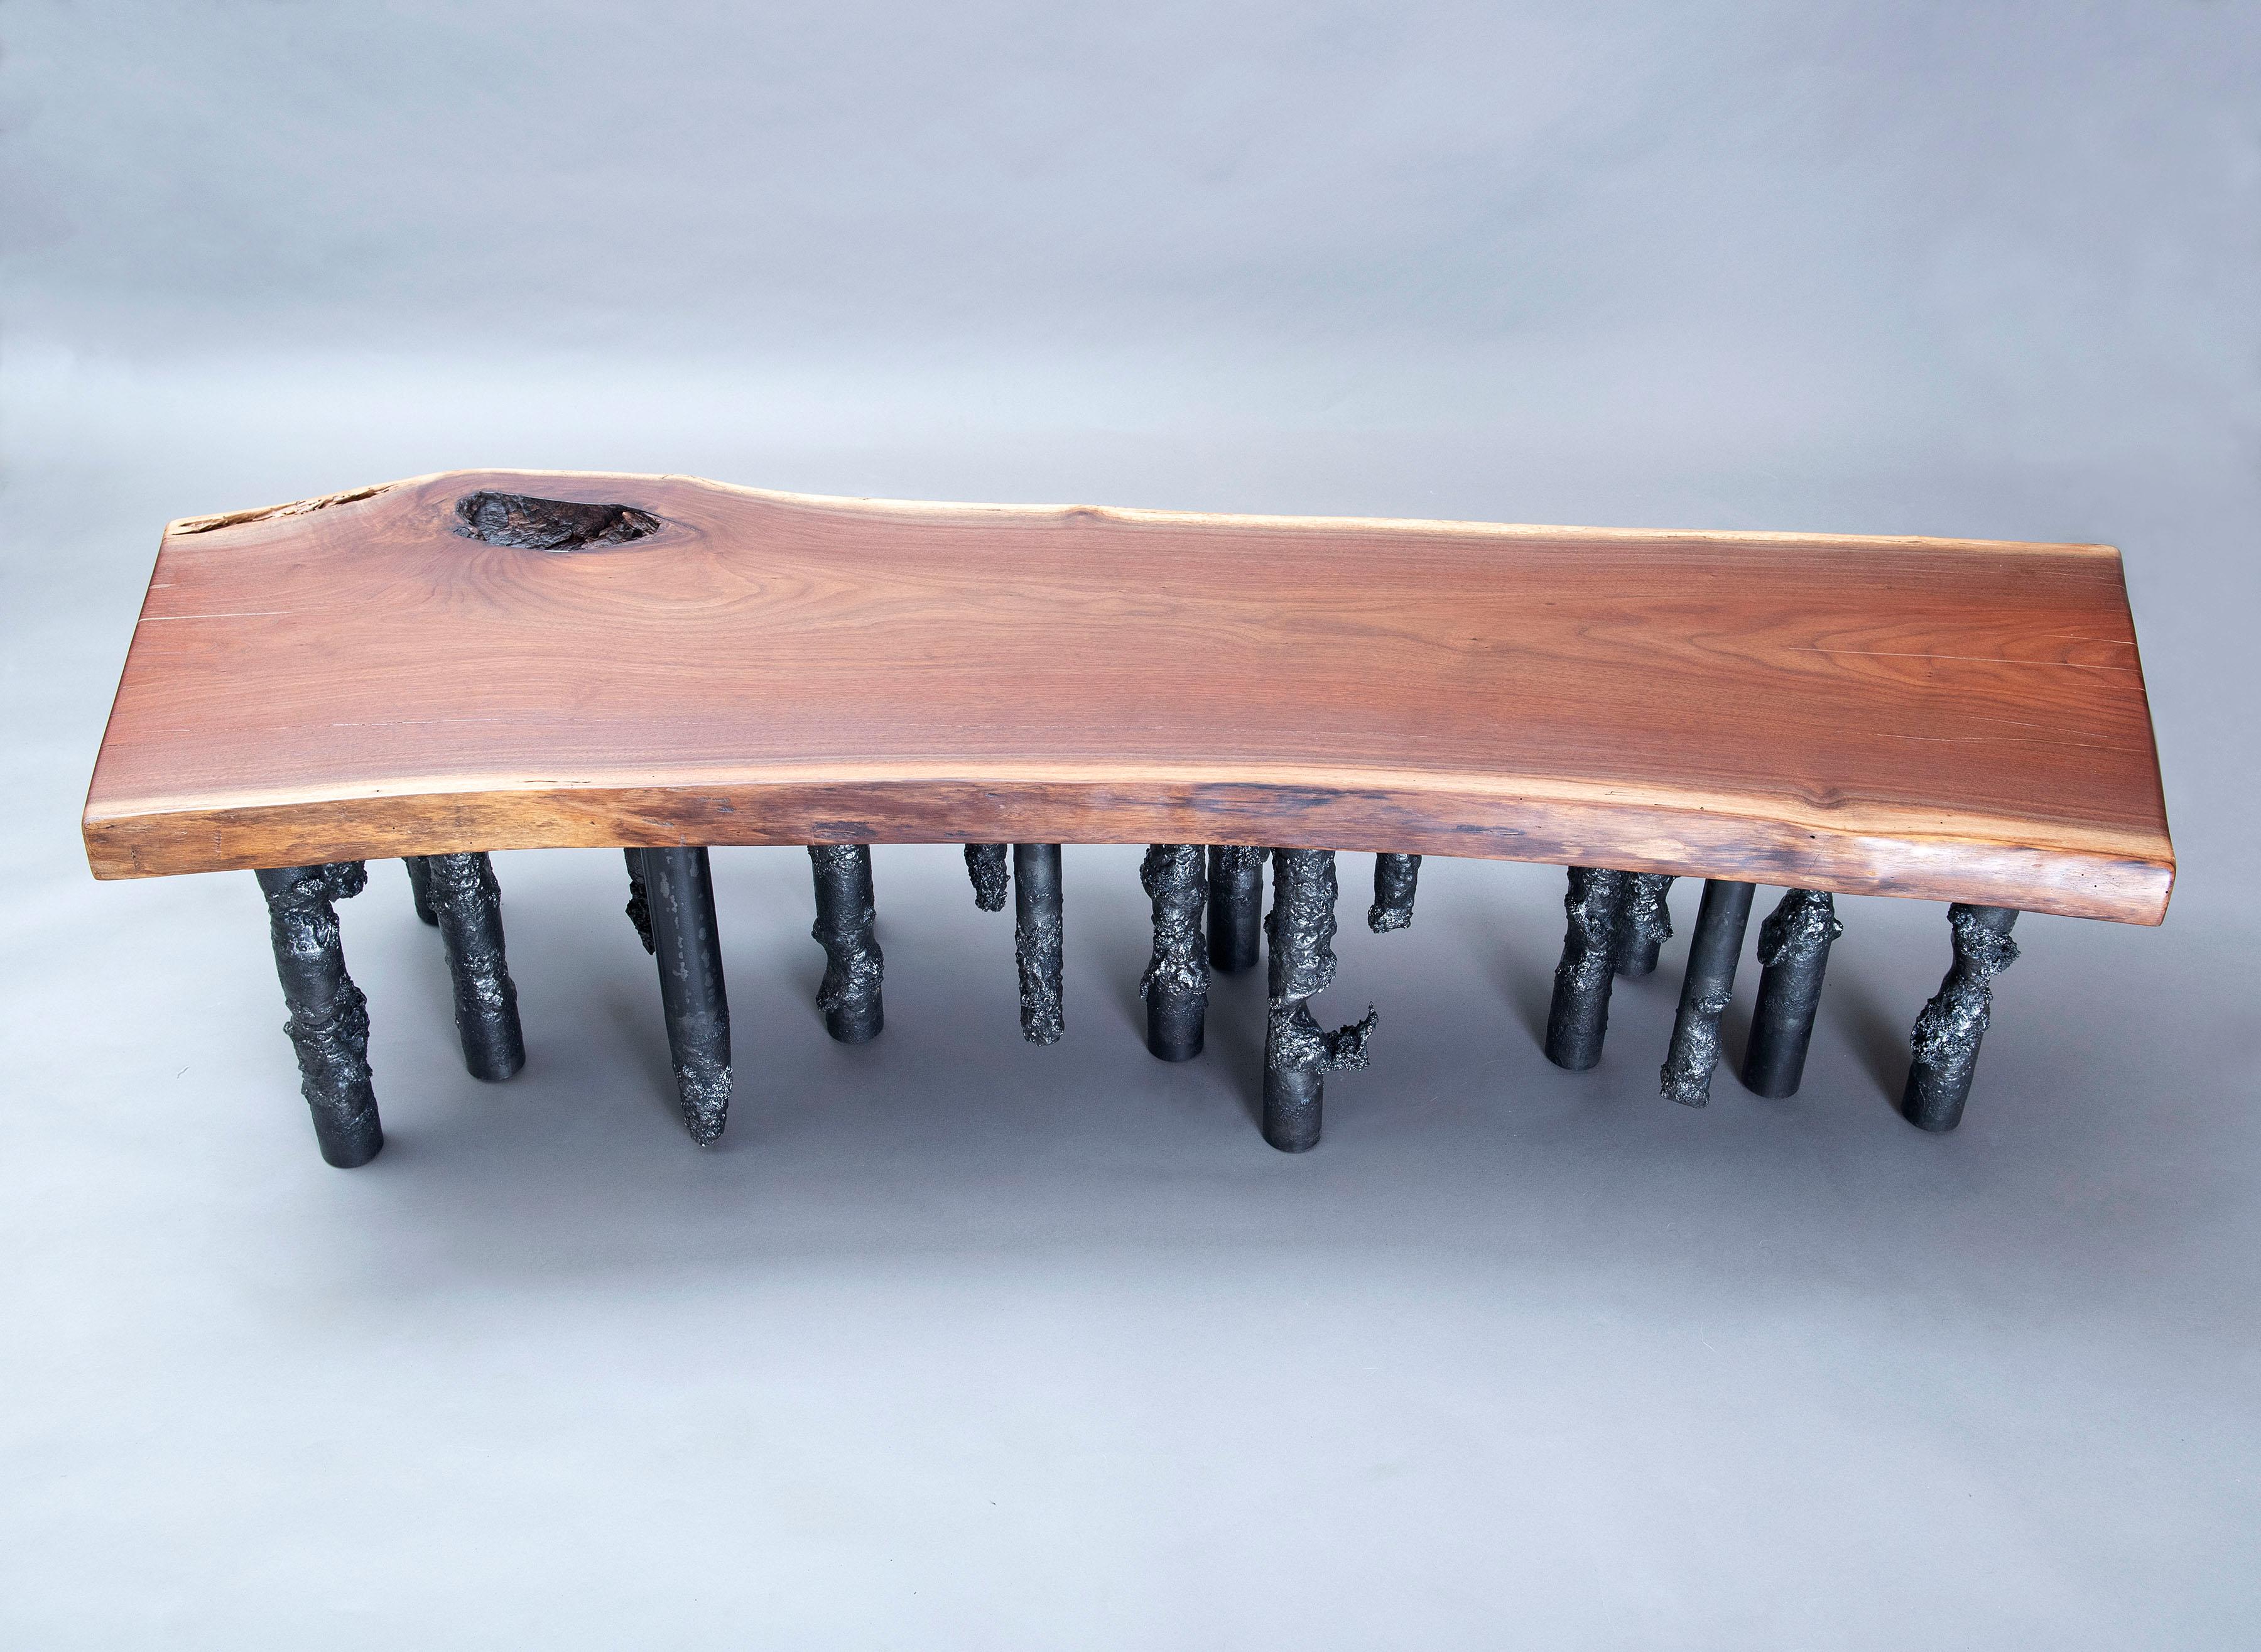 Metalwork Handcrafted Artisan Walnut And Steel One Of A Kind Sculptural Industrial Bench For Sale